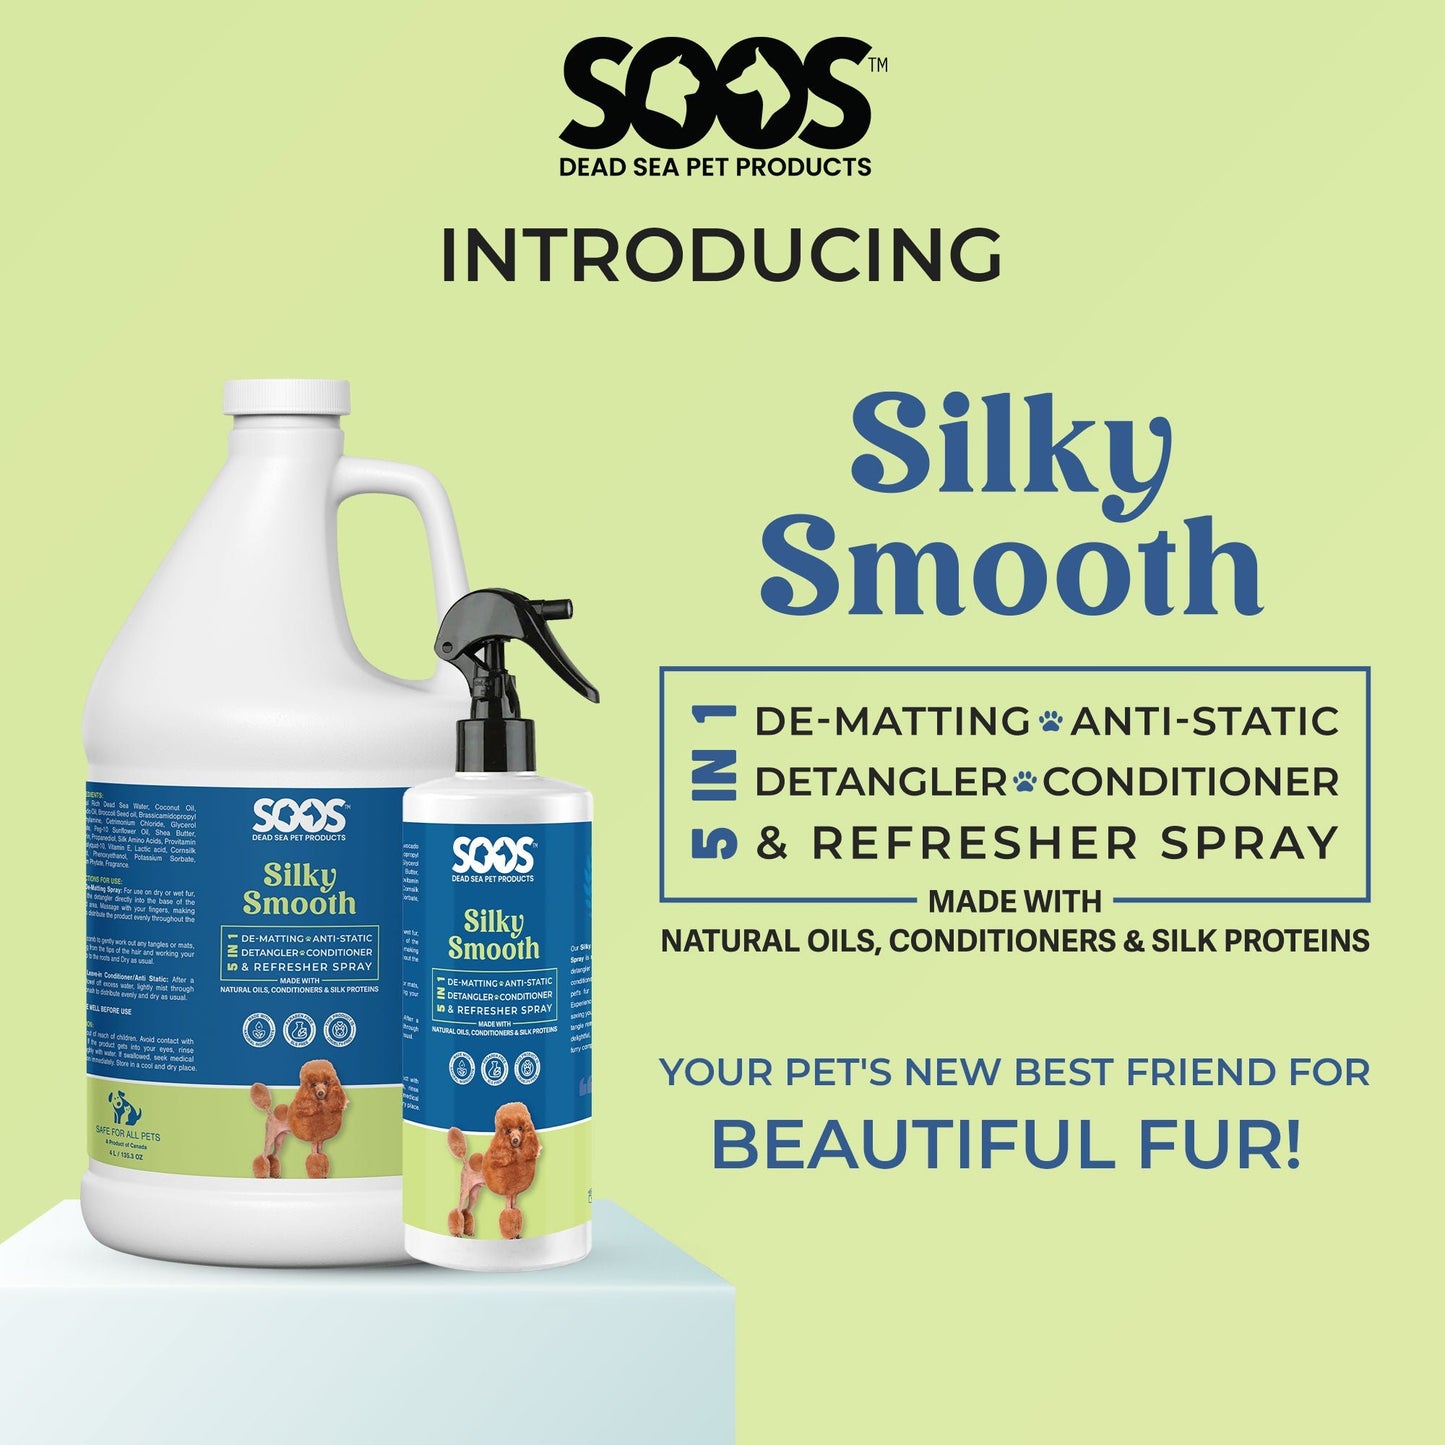 Silky Smooth 5-in-1 Leave-on Conditioning Spray for Dogs and Cats by Soos Pets - Soos Pets